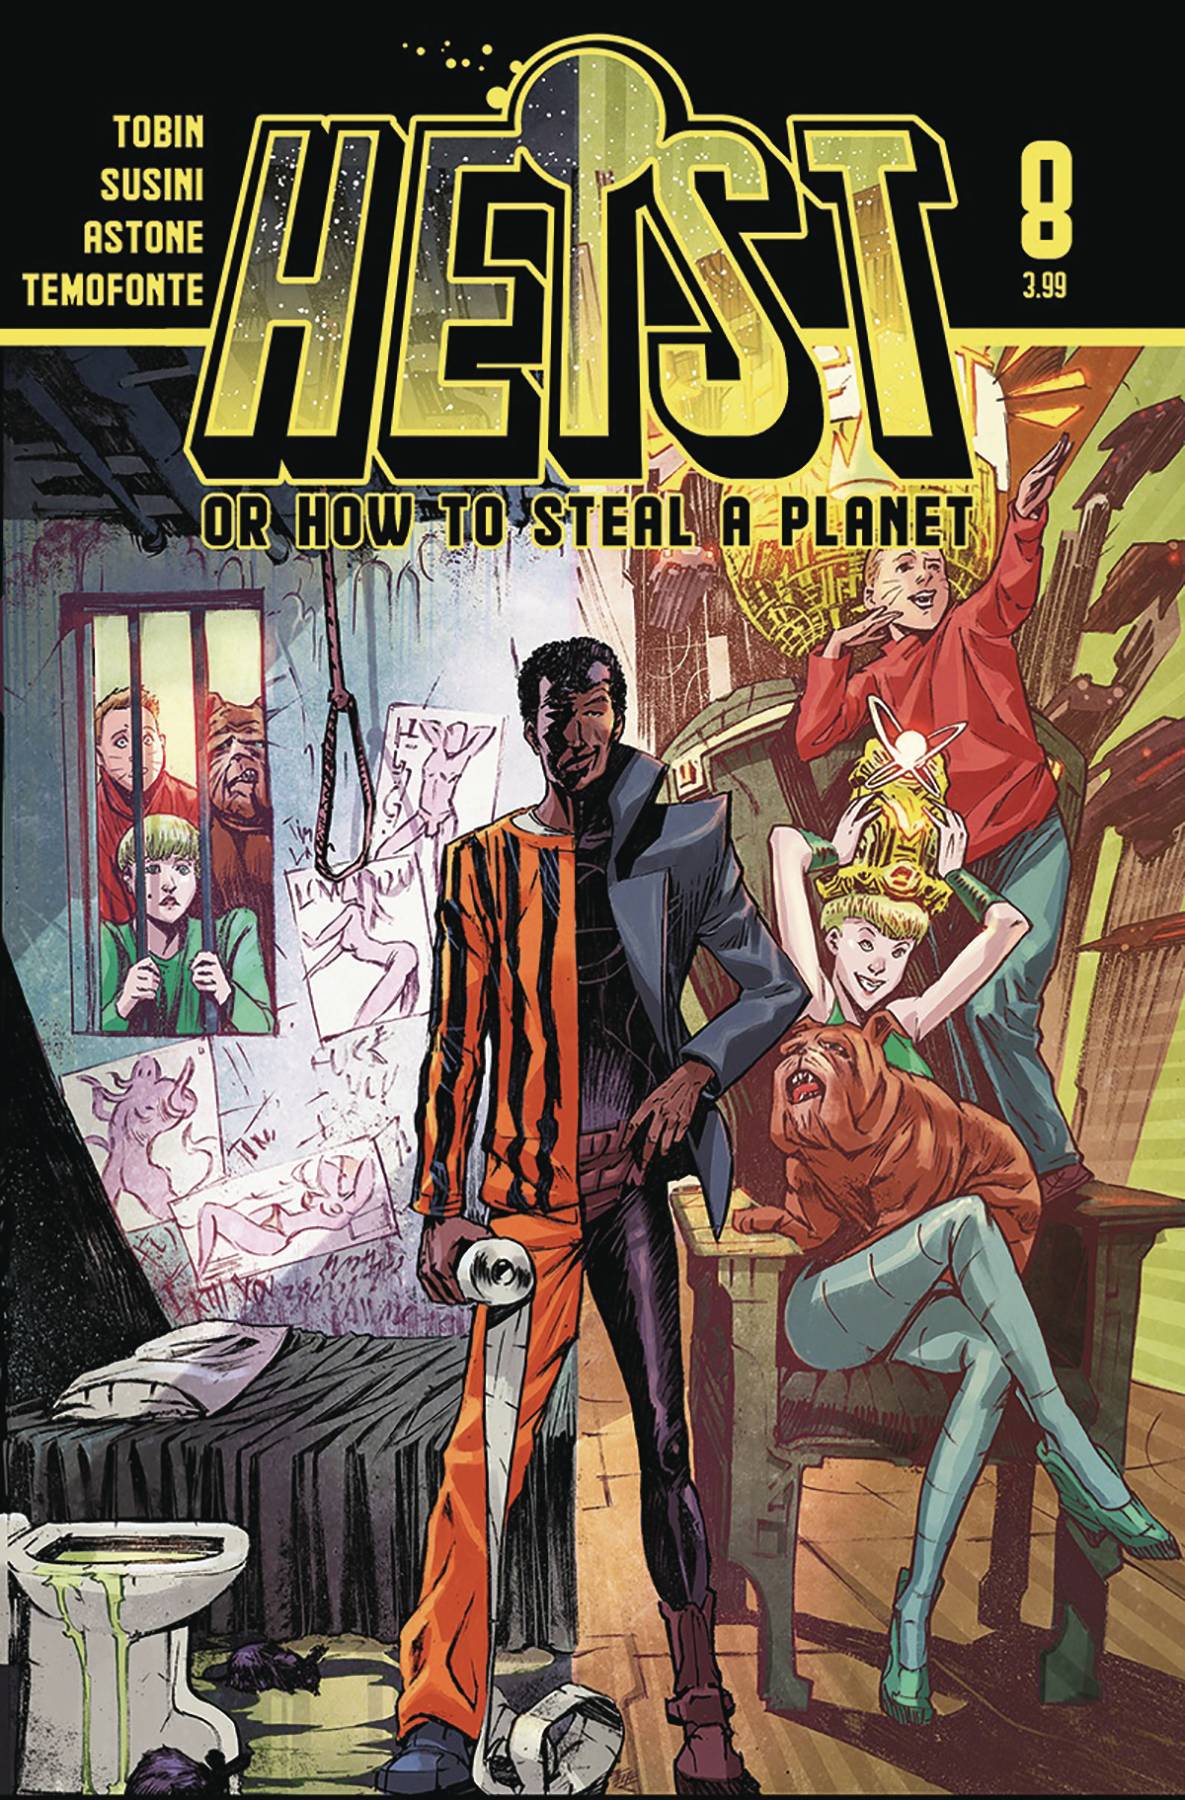 Heist How To Steal A Planet #8